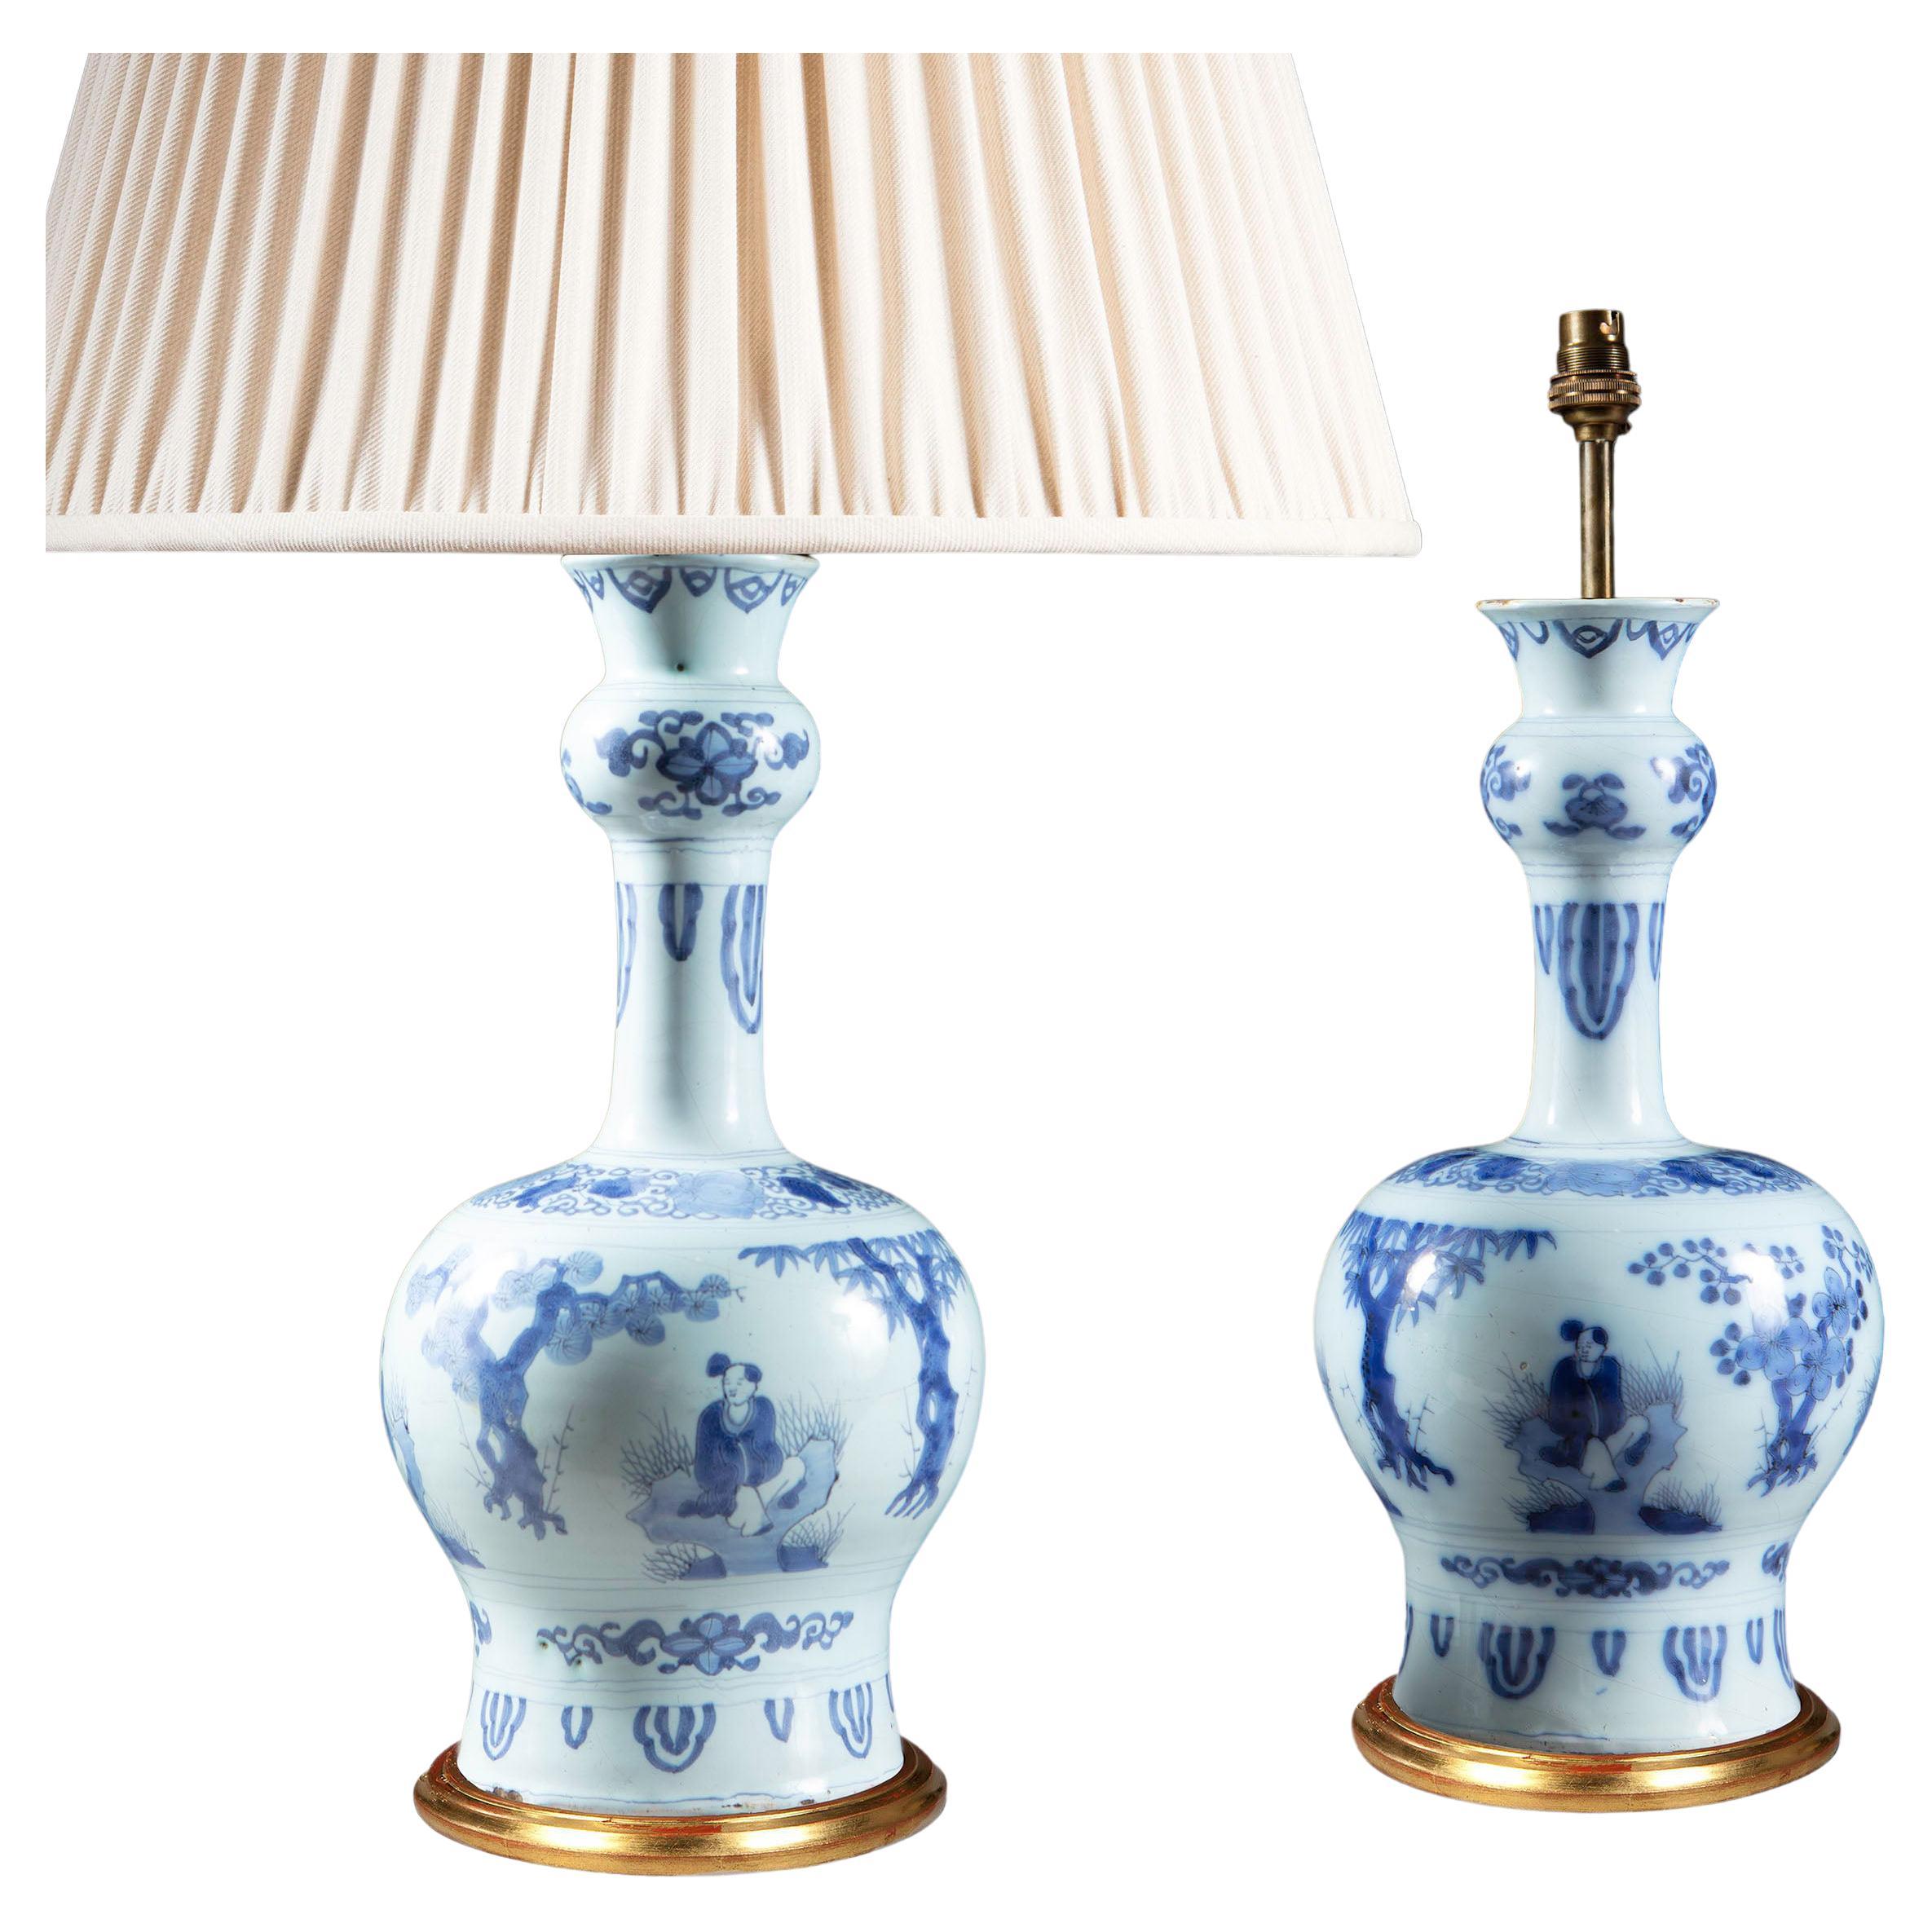 Pair of Early 18th Century Dutch Delft Knobble Vases Mounted as Table Lamps